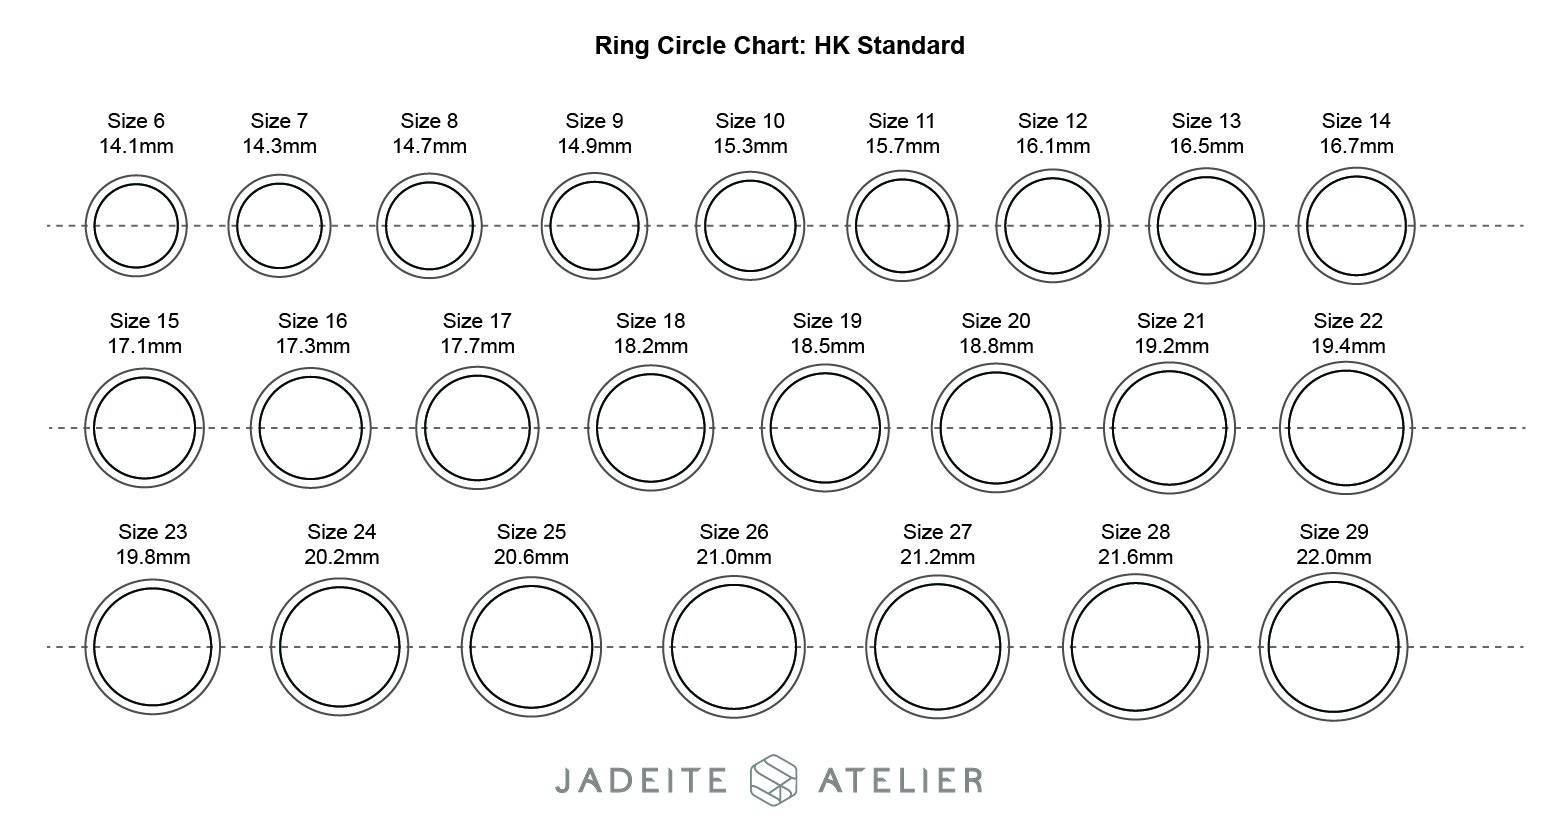 Ring size circle chart android wear os